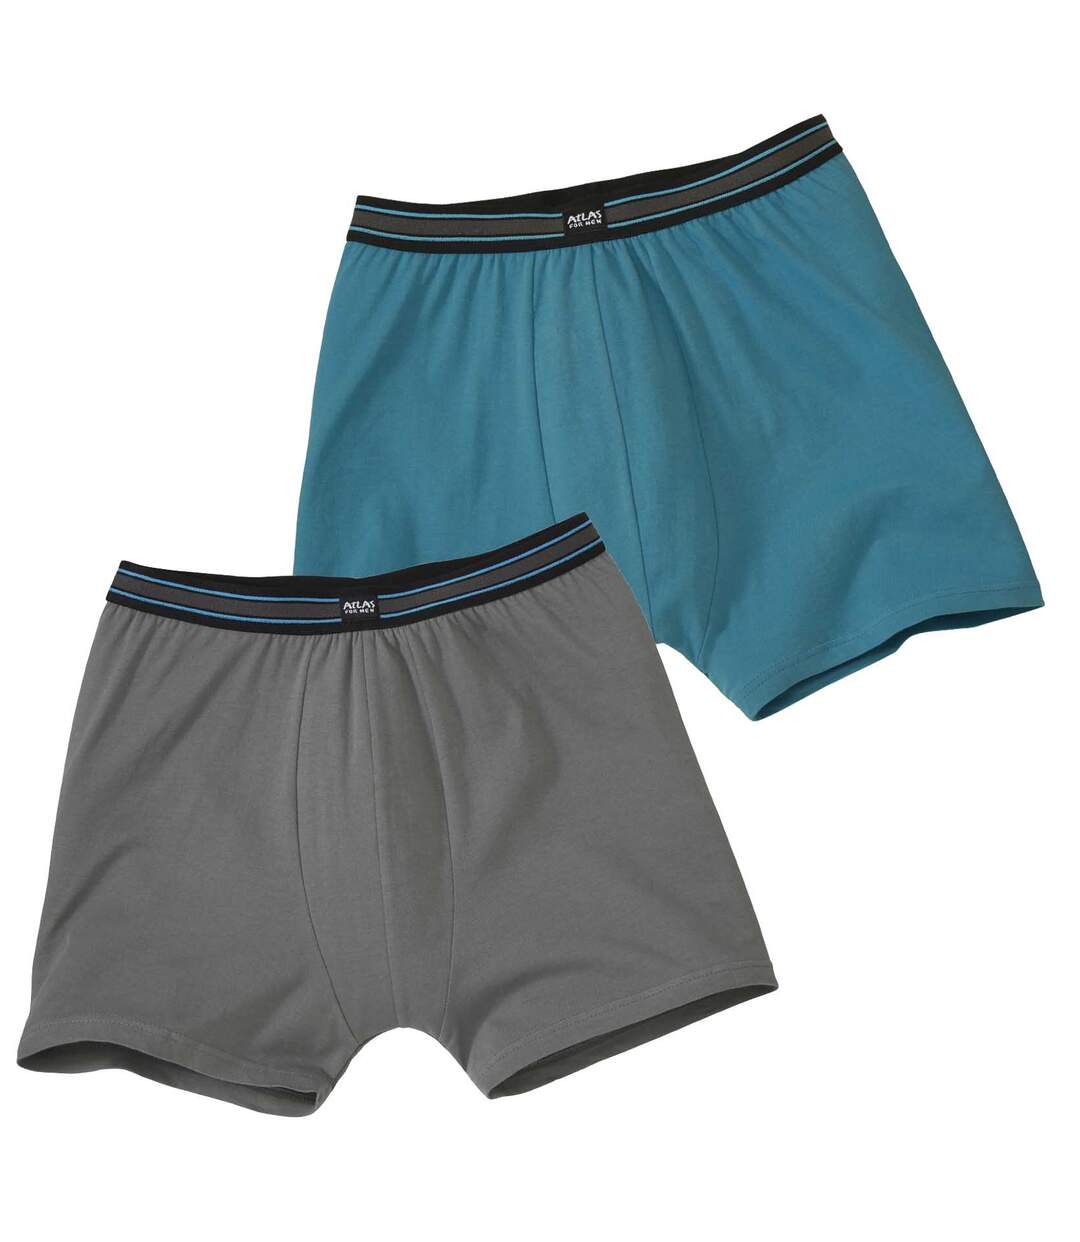 Pack of 2 Men's Monochrome Comfort Stretch Boxers - Turquoise Gray Atlas For Men